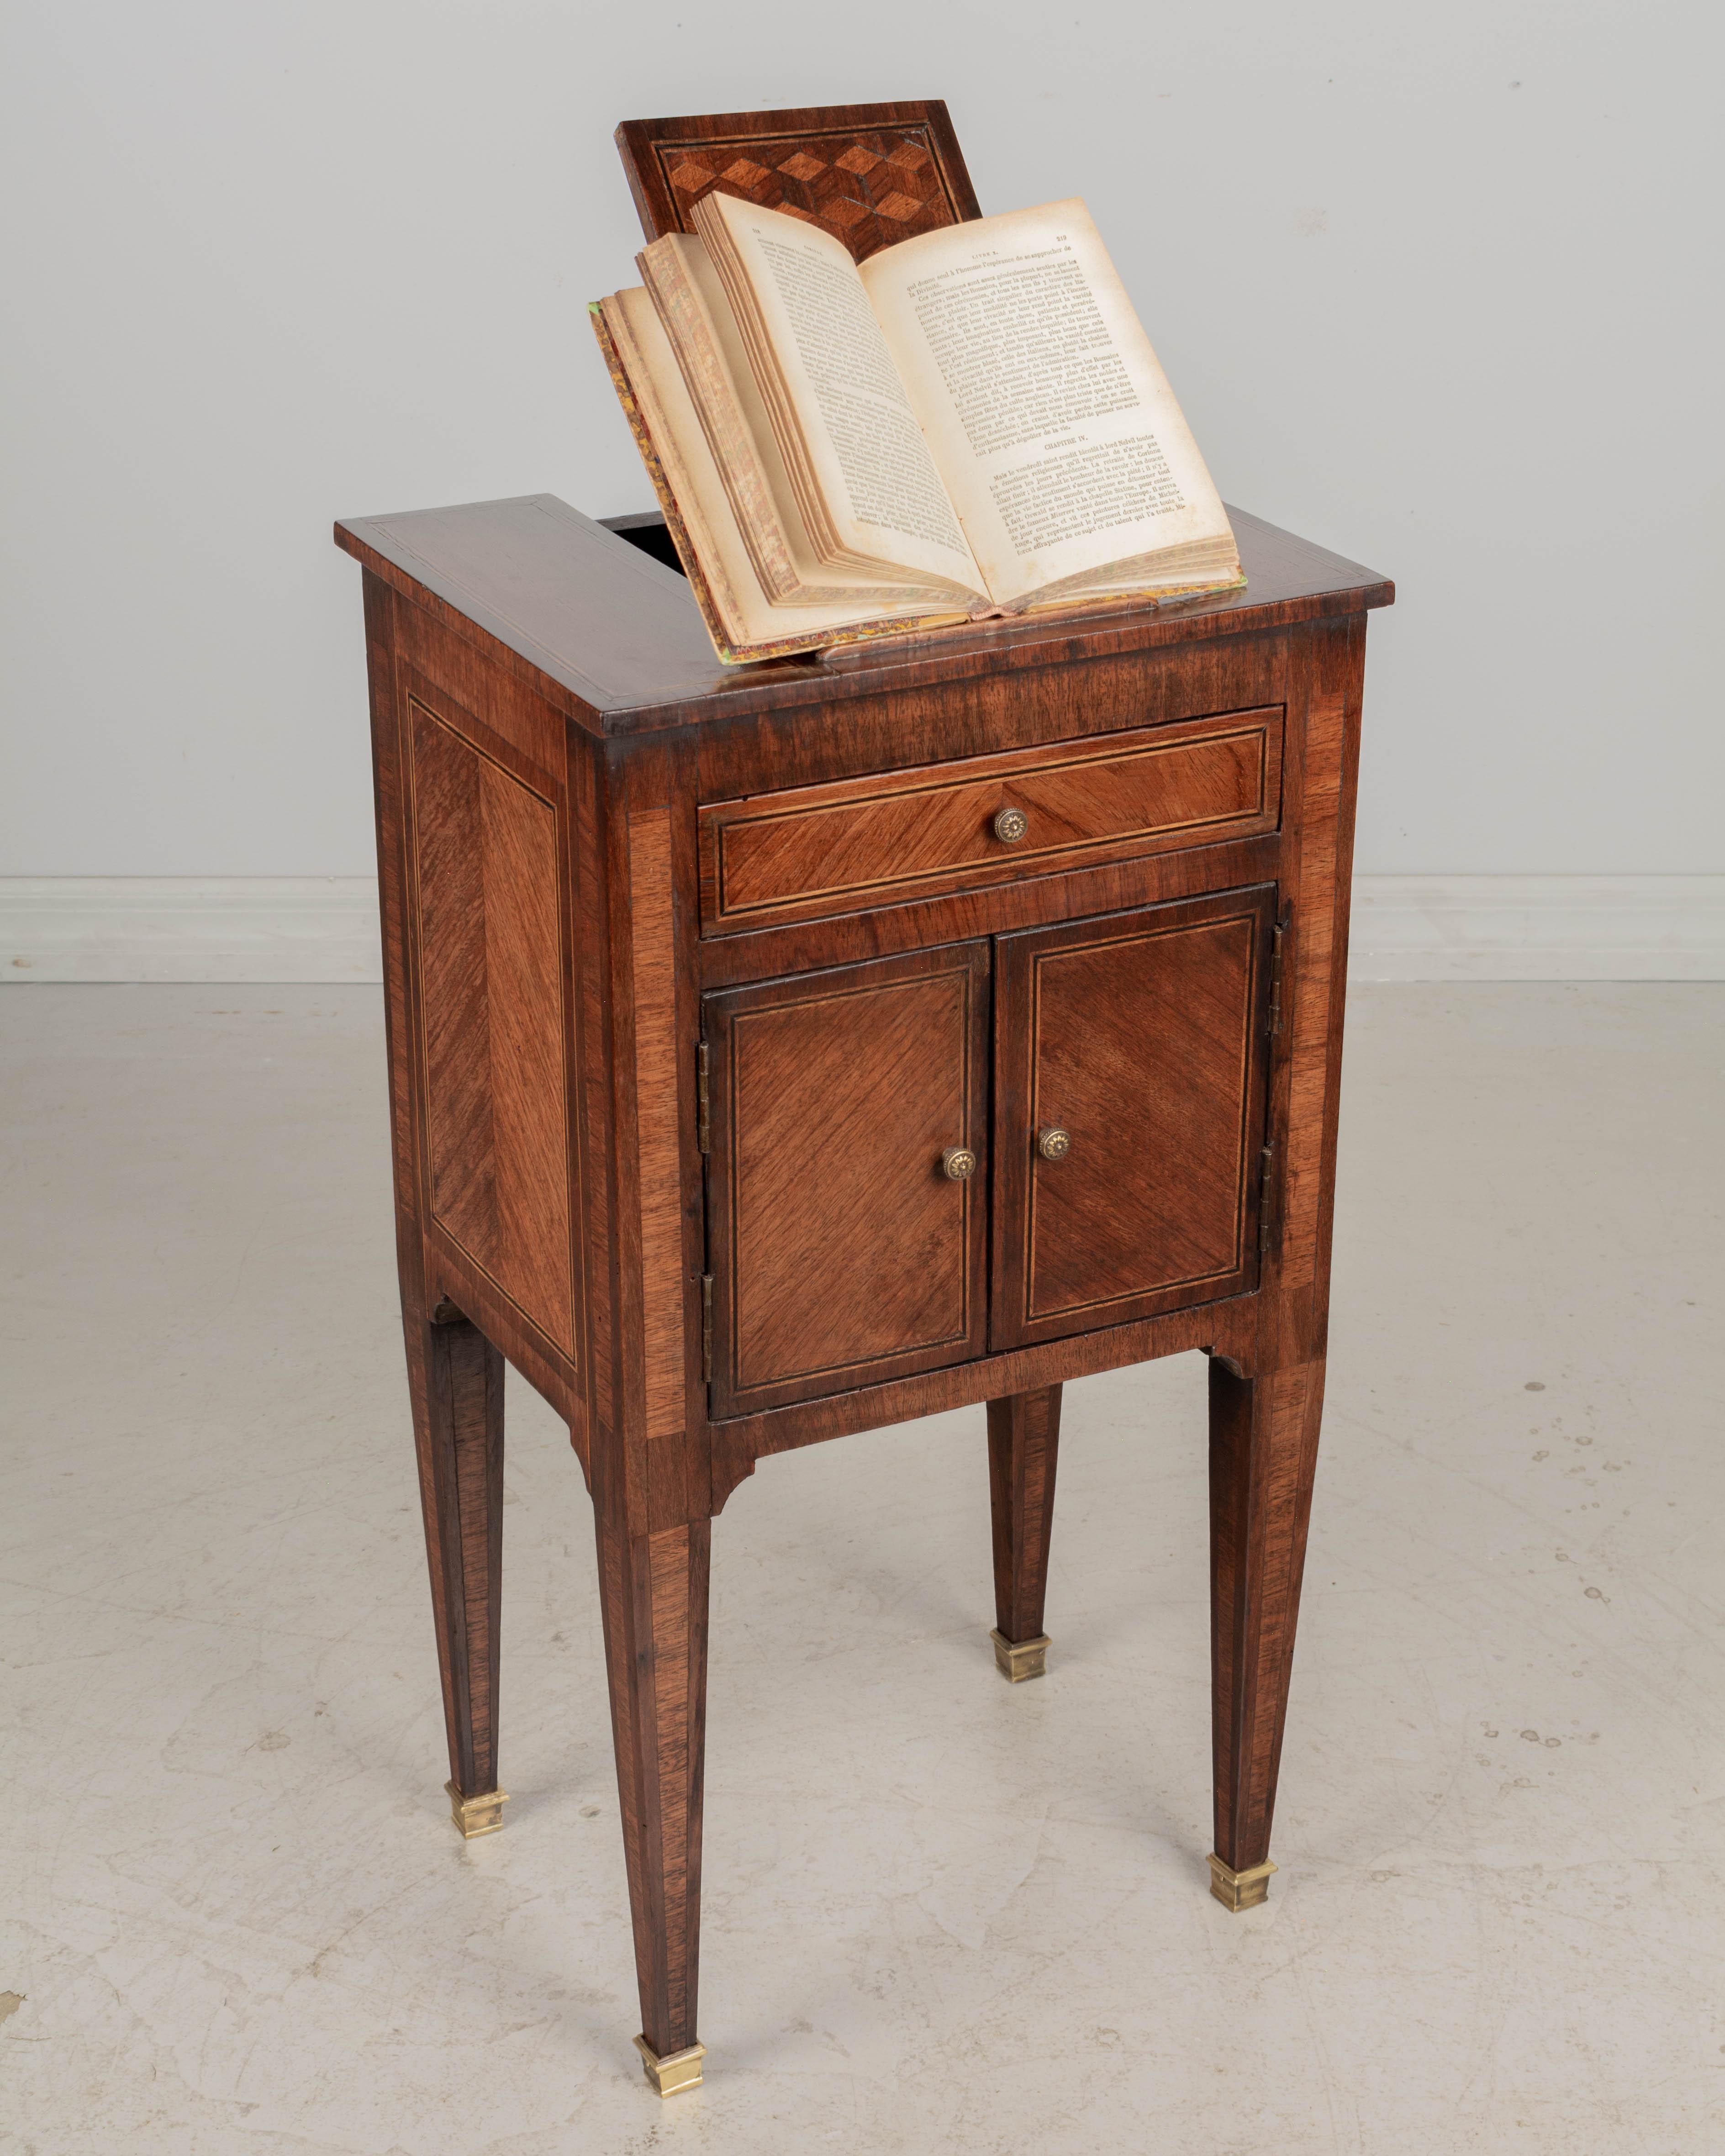 A 19th century French Louis XVI style marquetry side table, or nightstand, with an unusual book stand, or easel that props open on the top. One dovetailed drawer above cabinet doors. Made of inlaid veneer of various woods, mainly mahogany. Slender